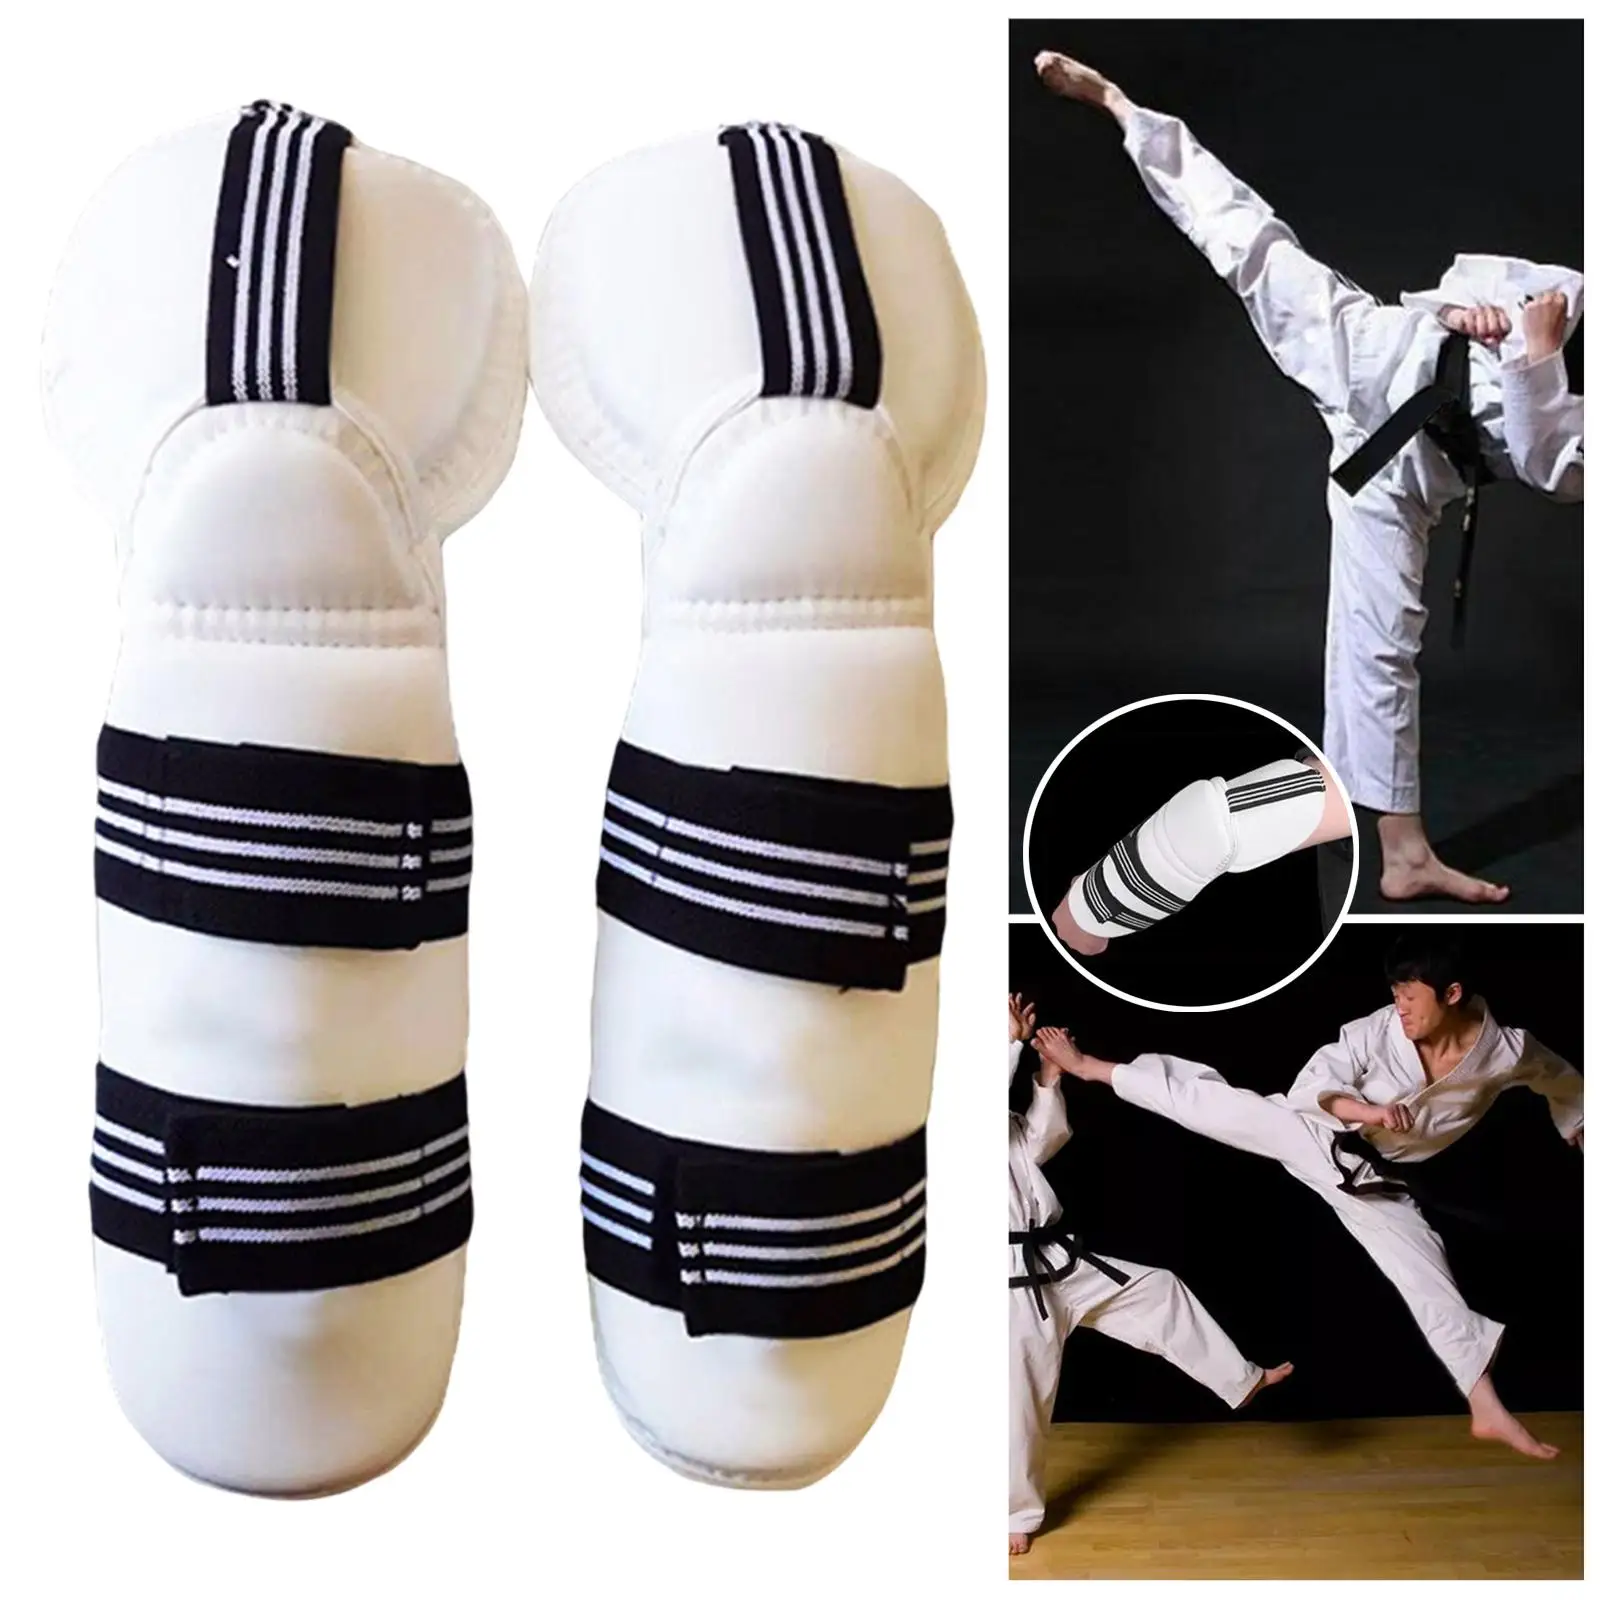 Protective Gear with Adjustable Elastic Strap Taekwondo Guard for Unisex Adults Kids Grappling Martial Arts Training Kickboxing